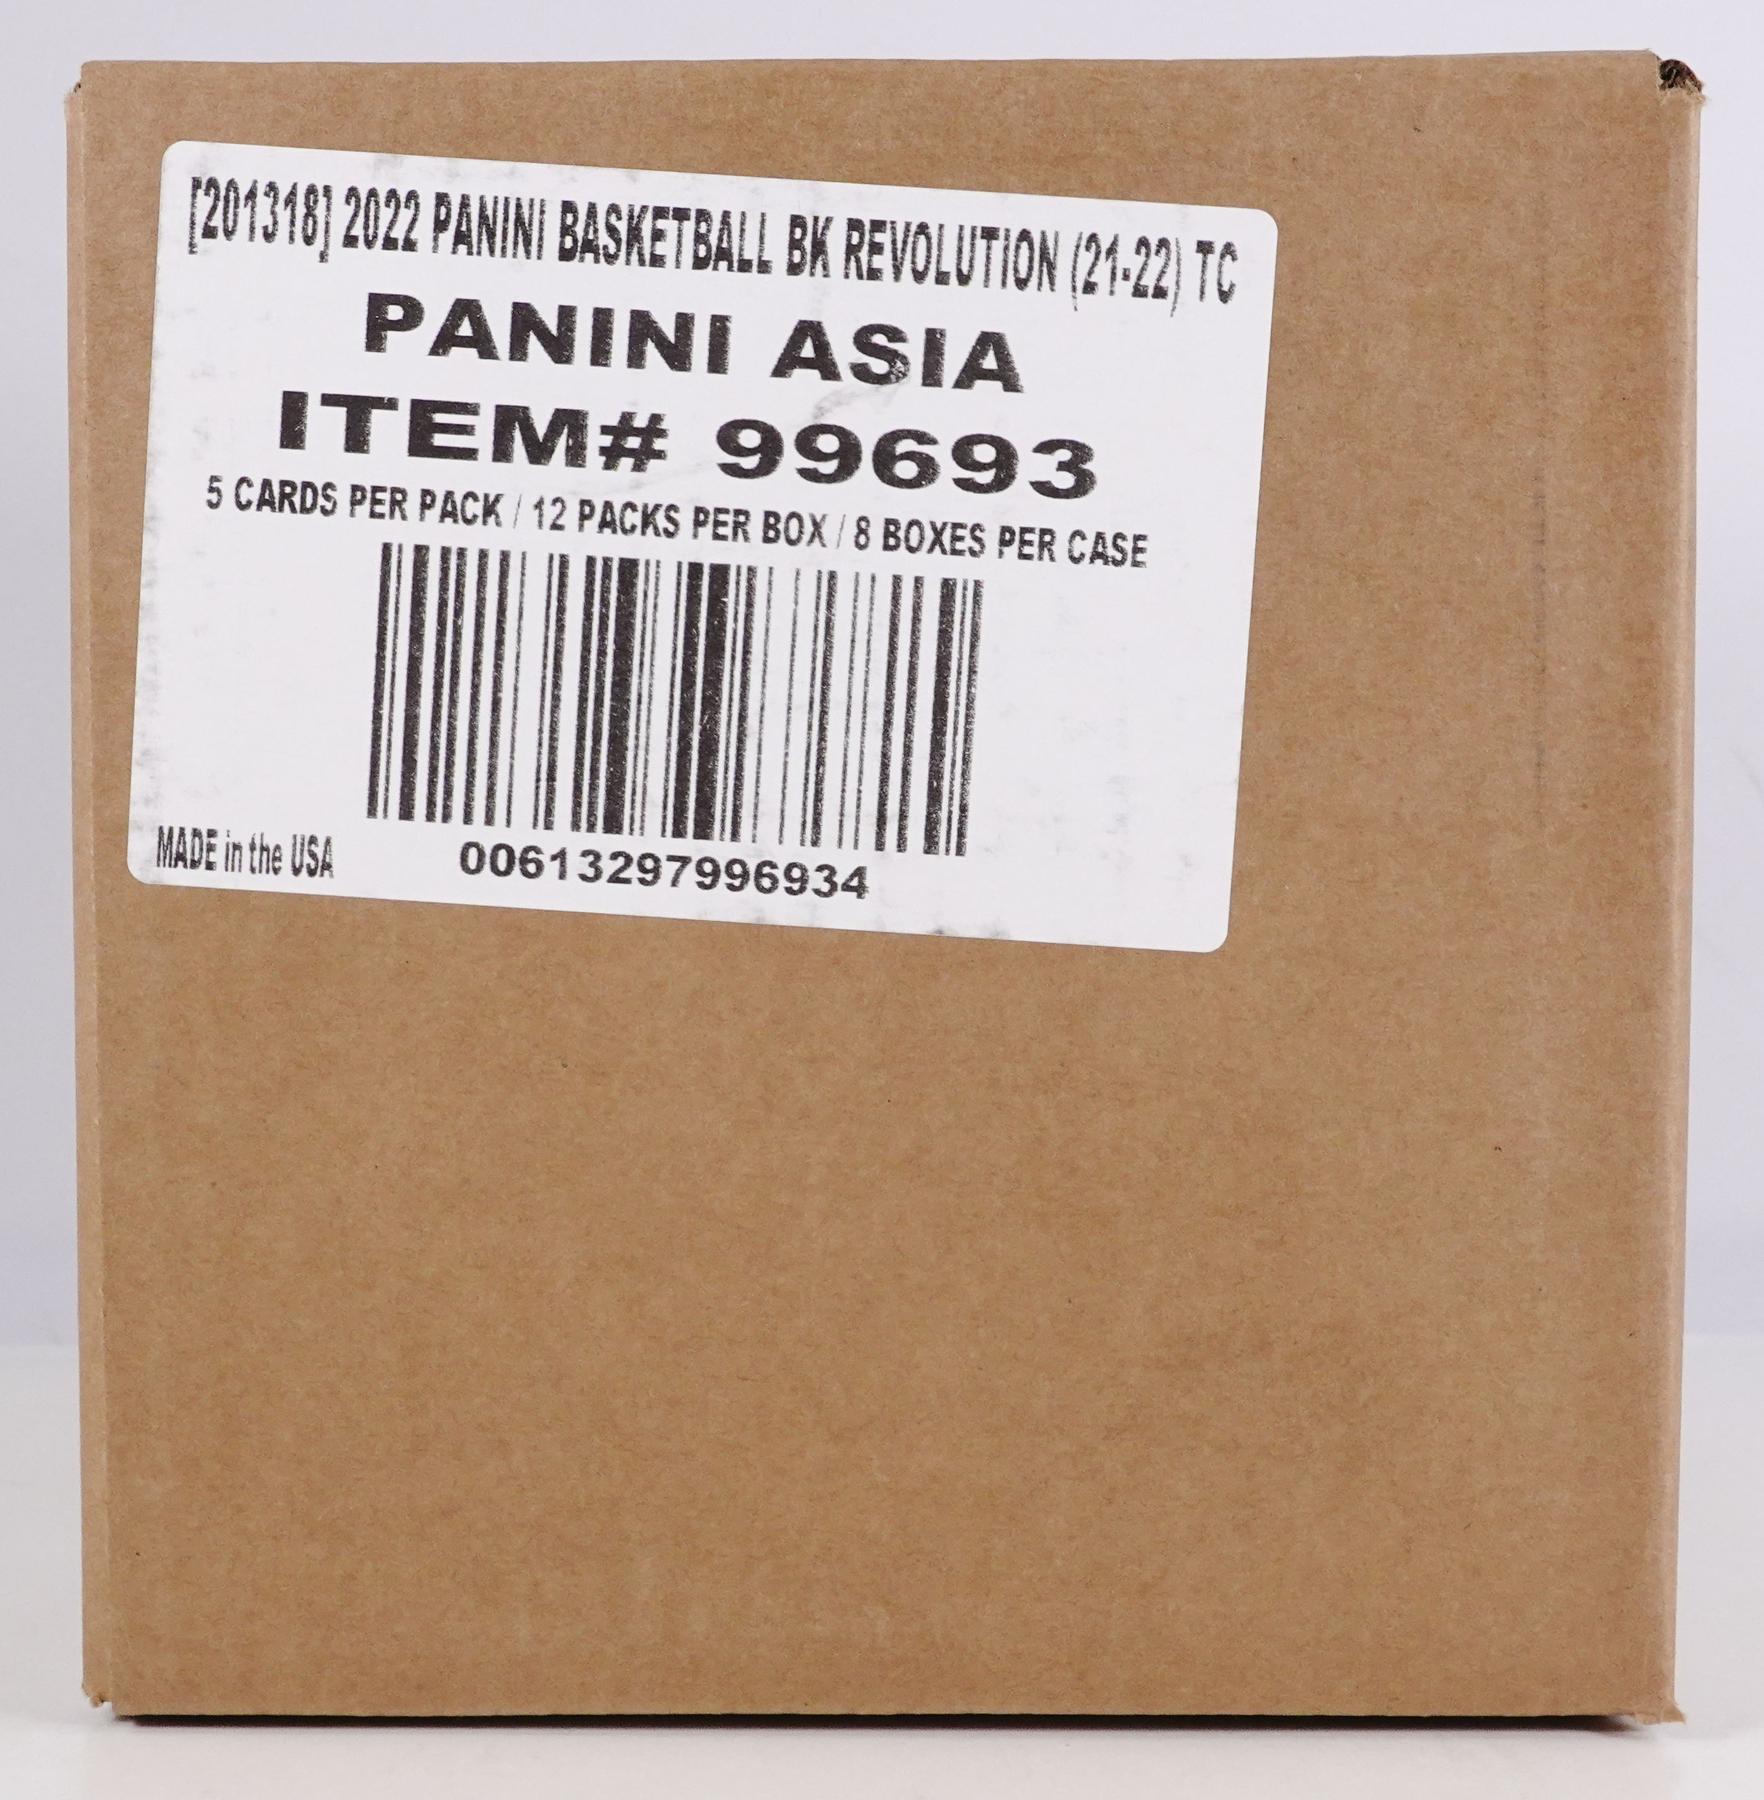 *****2021-2022 Panini Revolution Asia Basketball Full 8 Box Case Pick Your Team #16 (Black Friday Special)